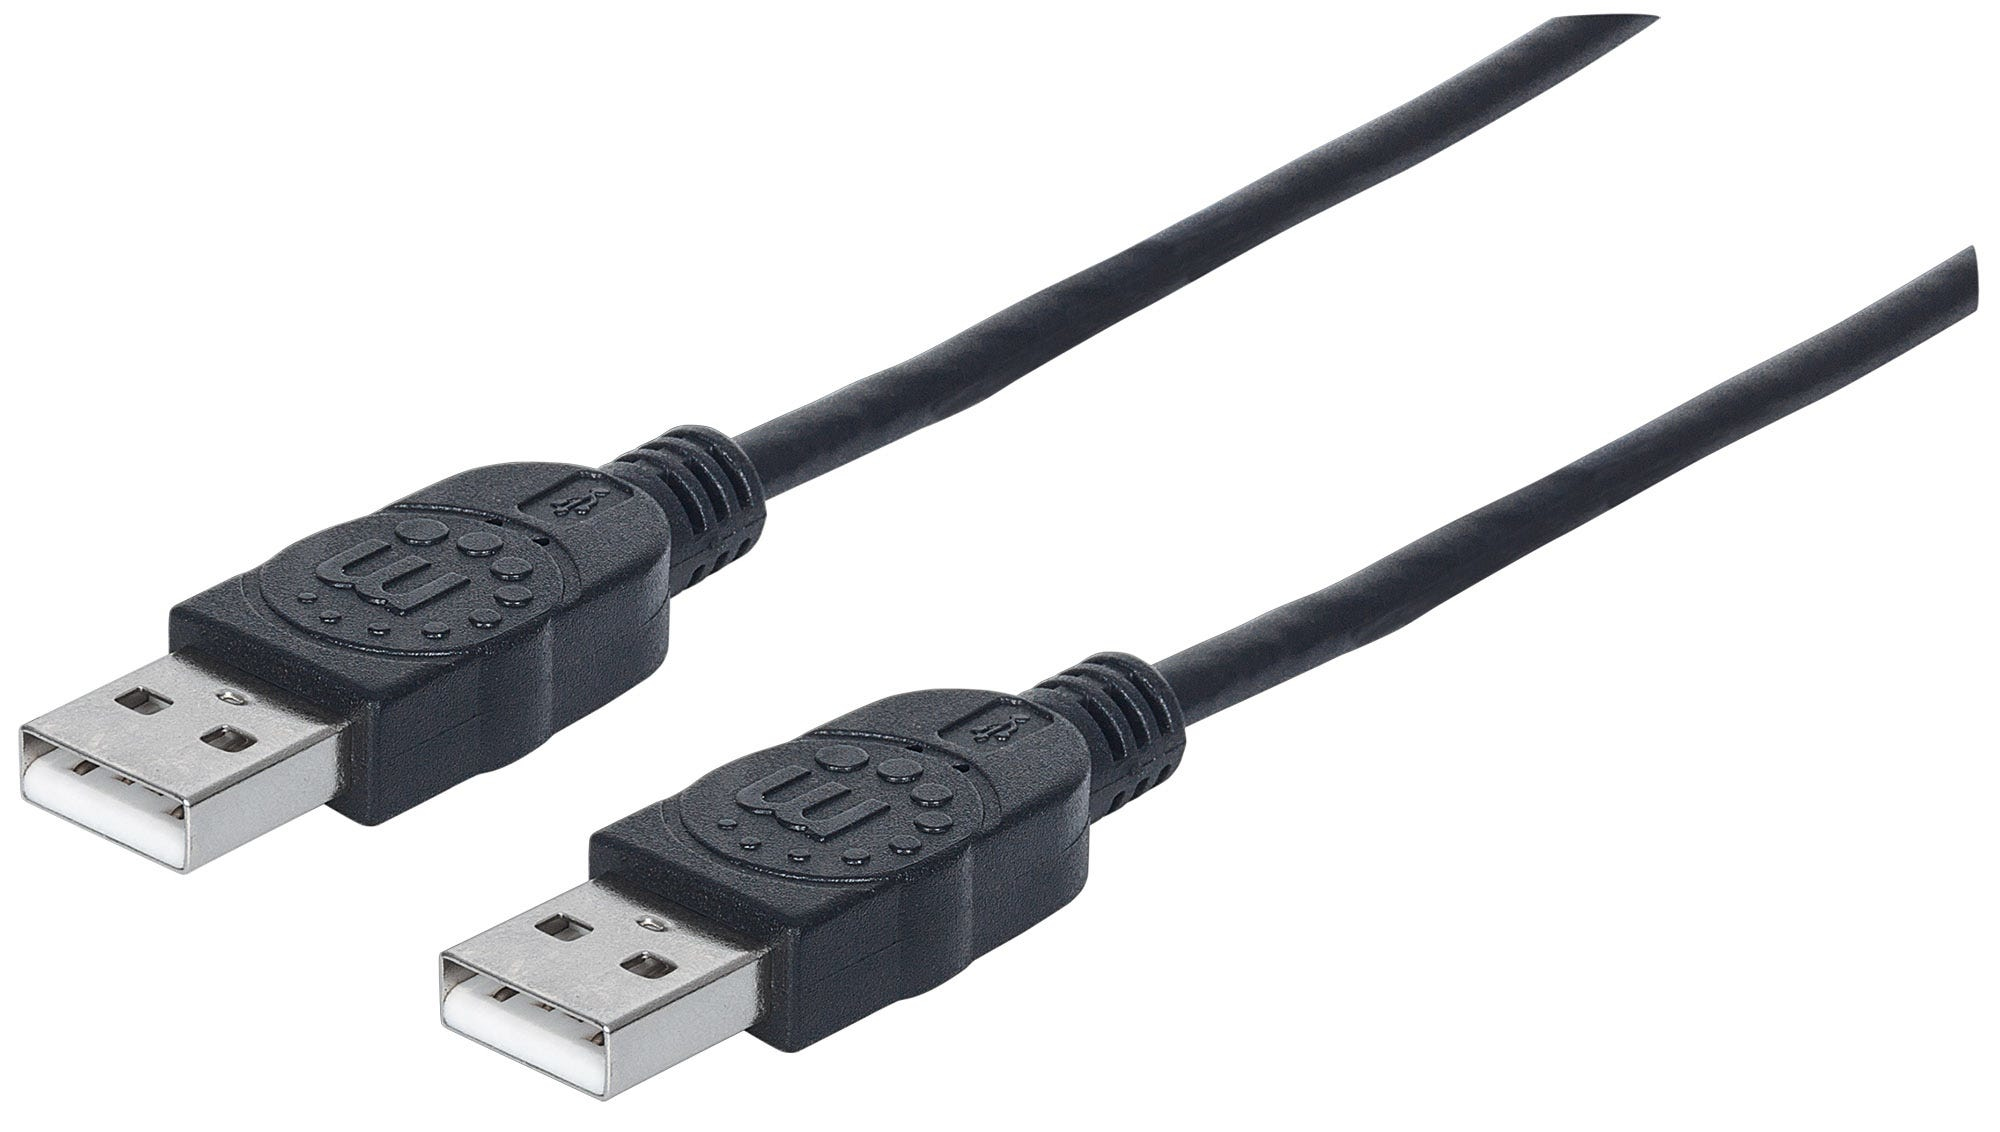 Photos - Cable (video, audio, USB) MANHATTAN USB-A to USB-A Cable, 3m, Male to Male, Black, 480 Mbps (USB 353 